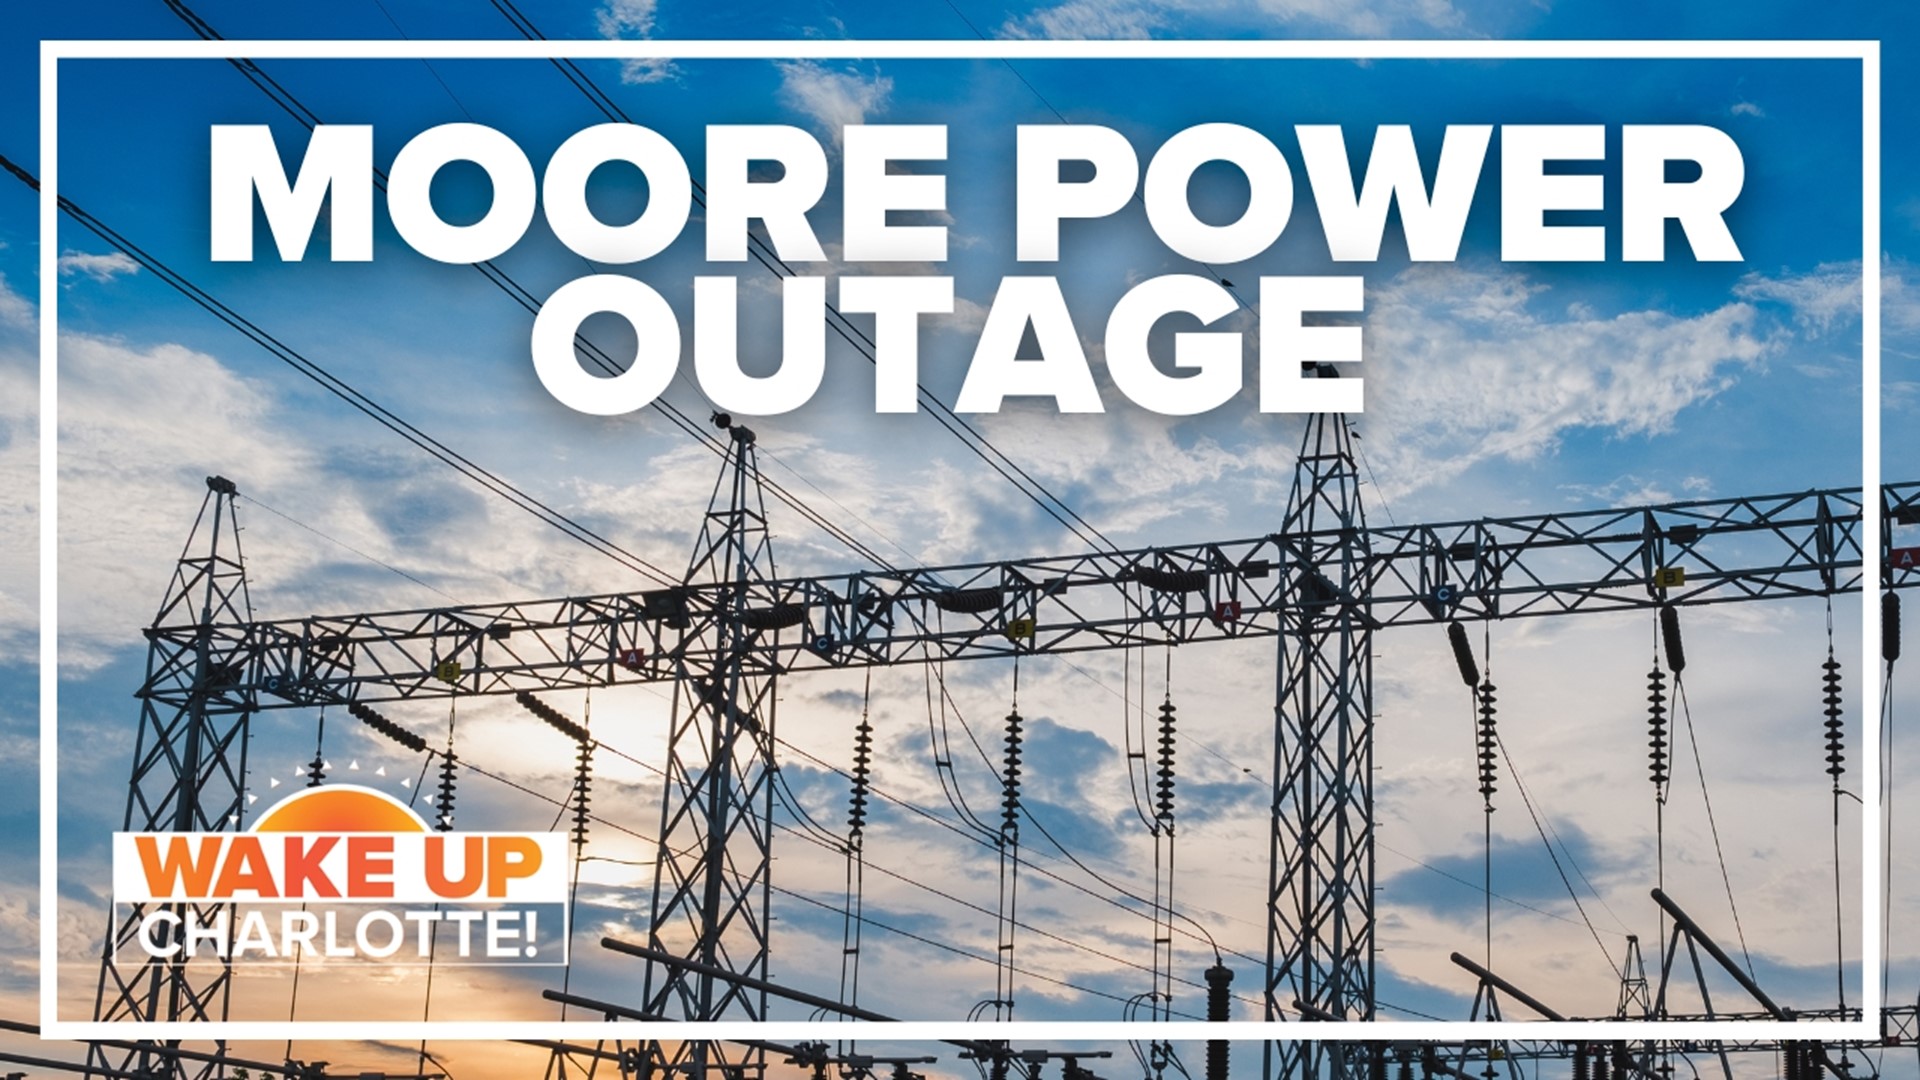 The widespread outages were caused by an attack on two substations.